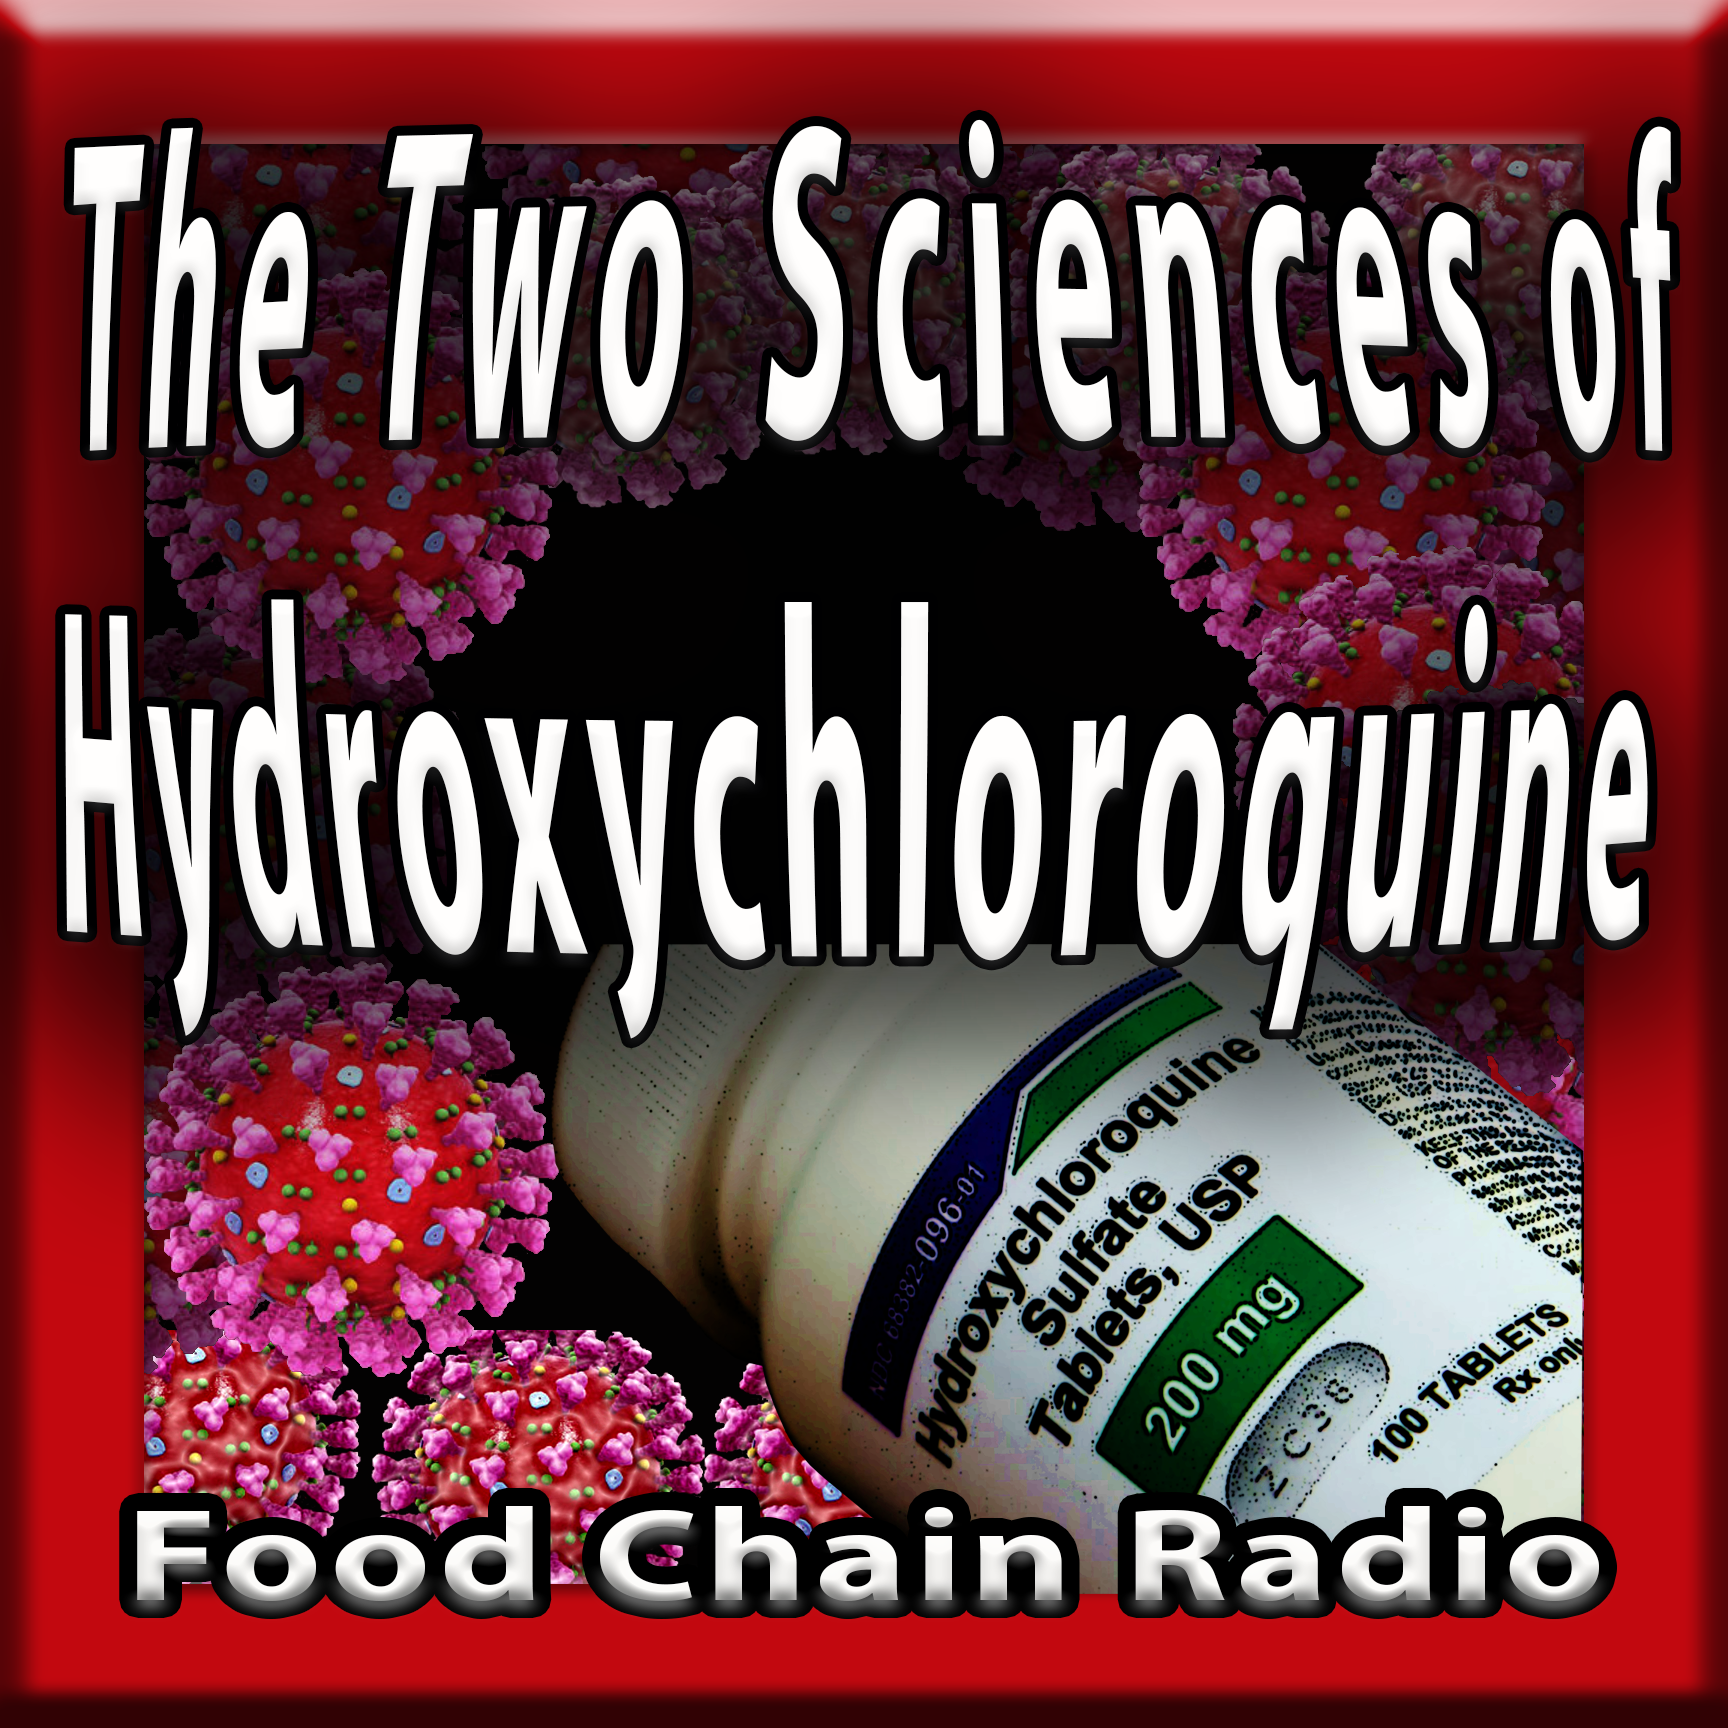 Michael Olson Food Chain Radio – The Two Sciences of Hydroxychloroquine – Whose hydroxychloroquine science is real?